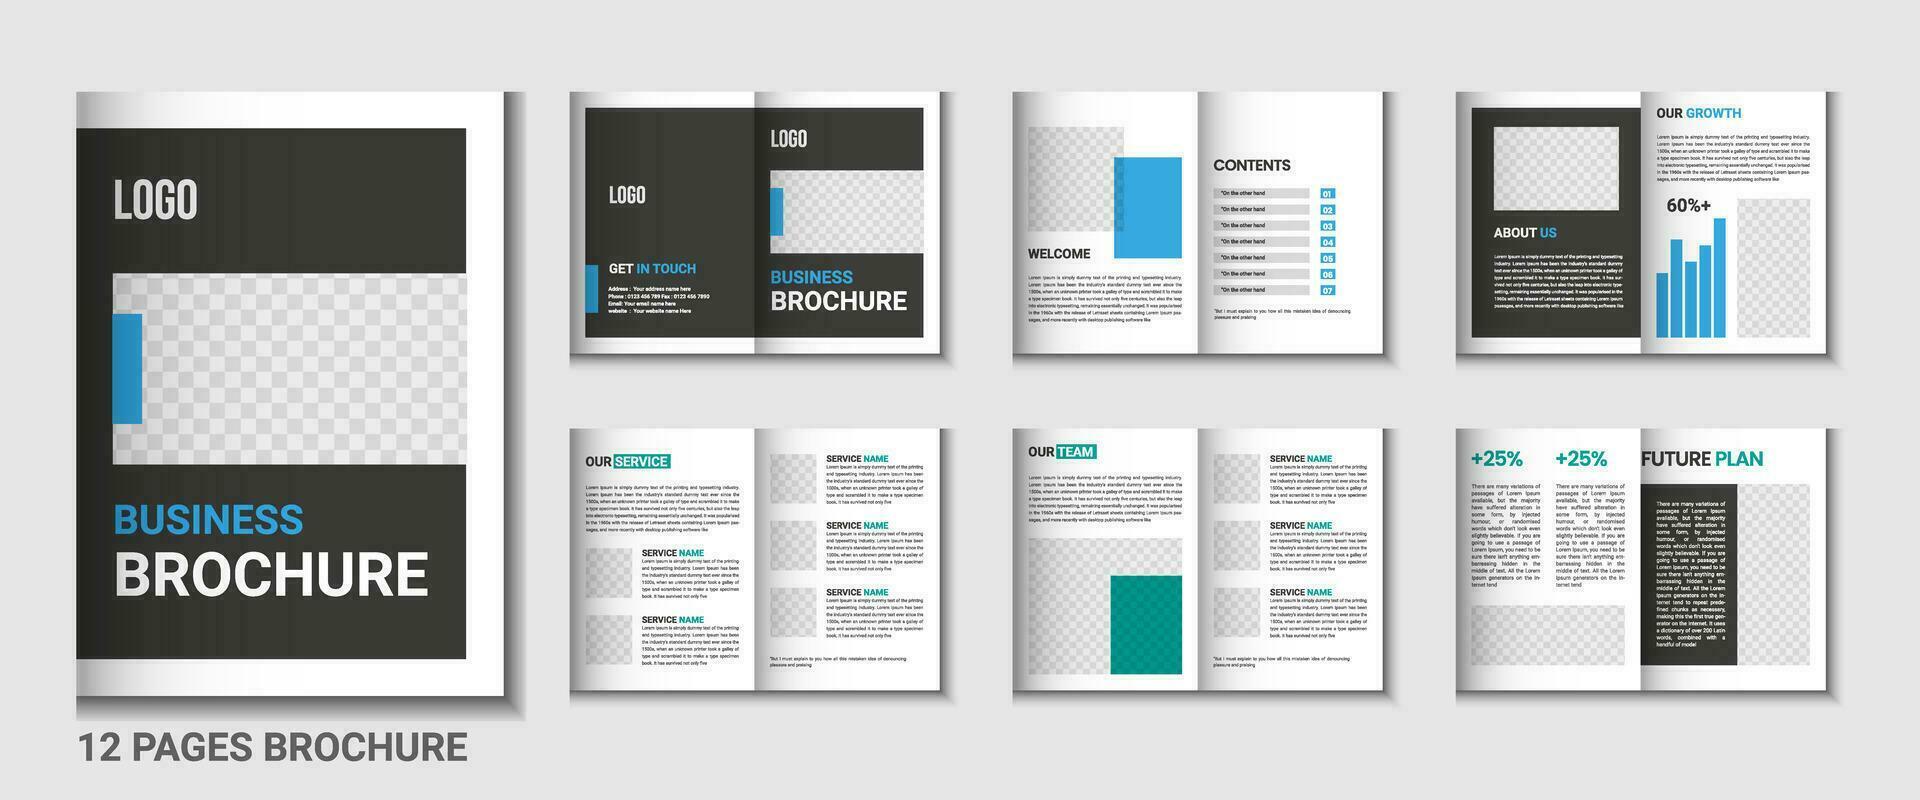 12 page corporate brochure profile design, business brochure layout, a4 size multipage flyer design, company profile and annual report template design vector